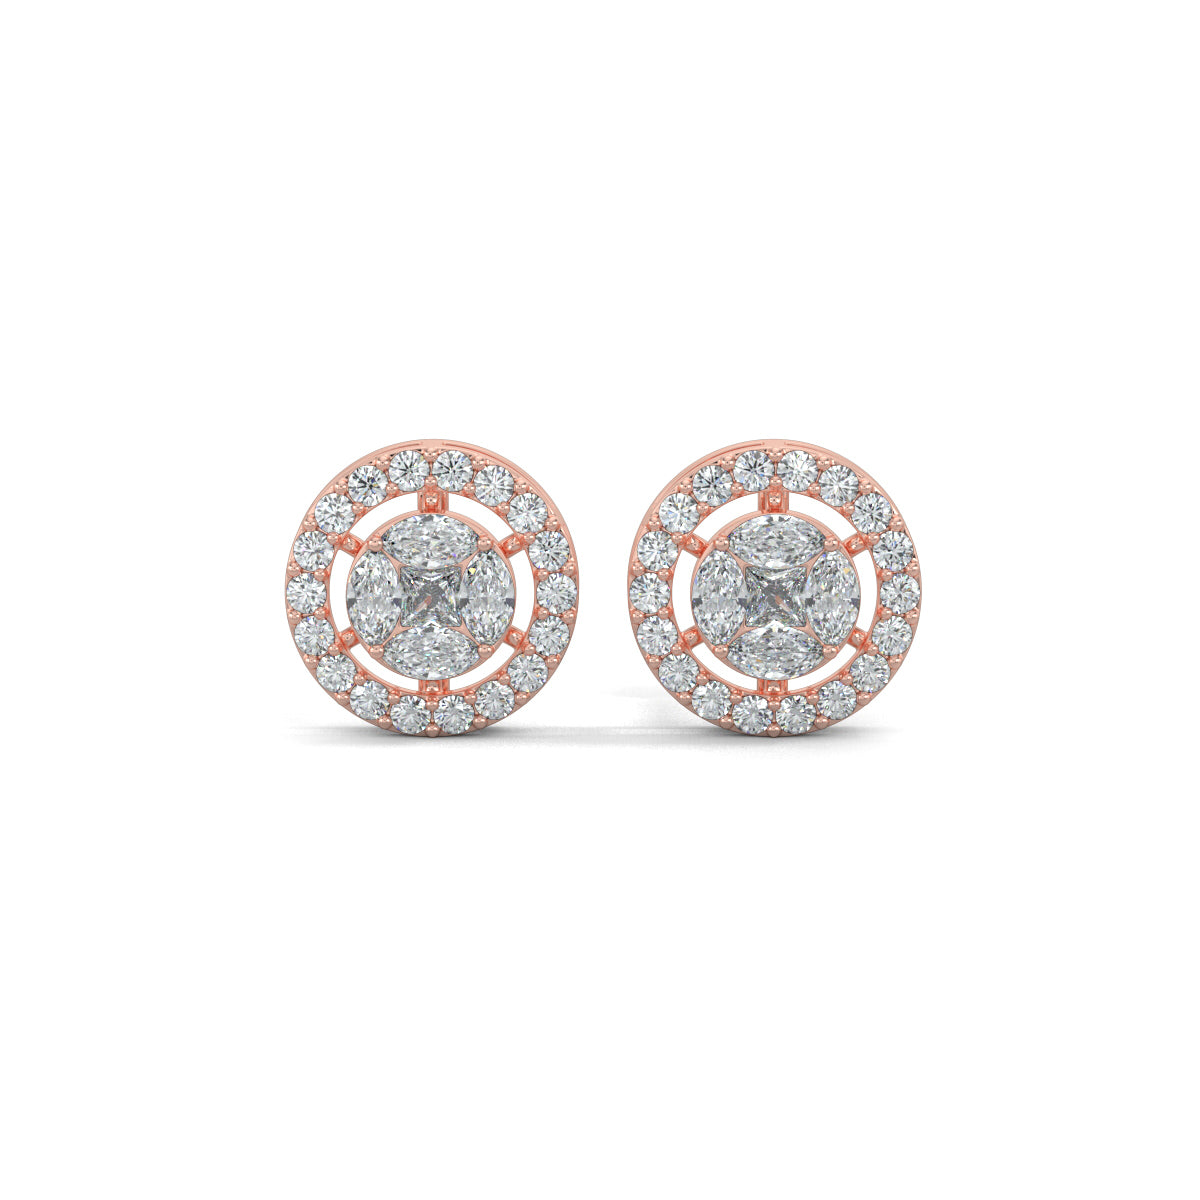 Rose Gold, Diamond Earrings, Cirque Crown Stud Earrings, Natural diamonds, Lab-grown diamond halo setting studs with round, princess cut, and marquise diamonds